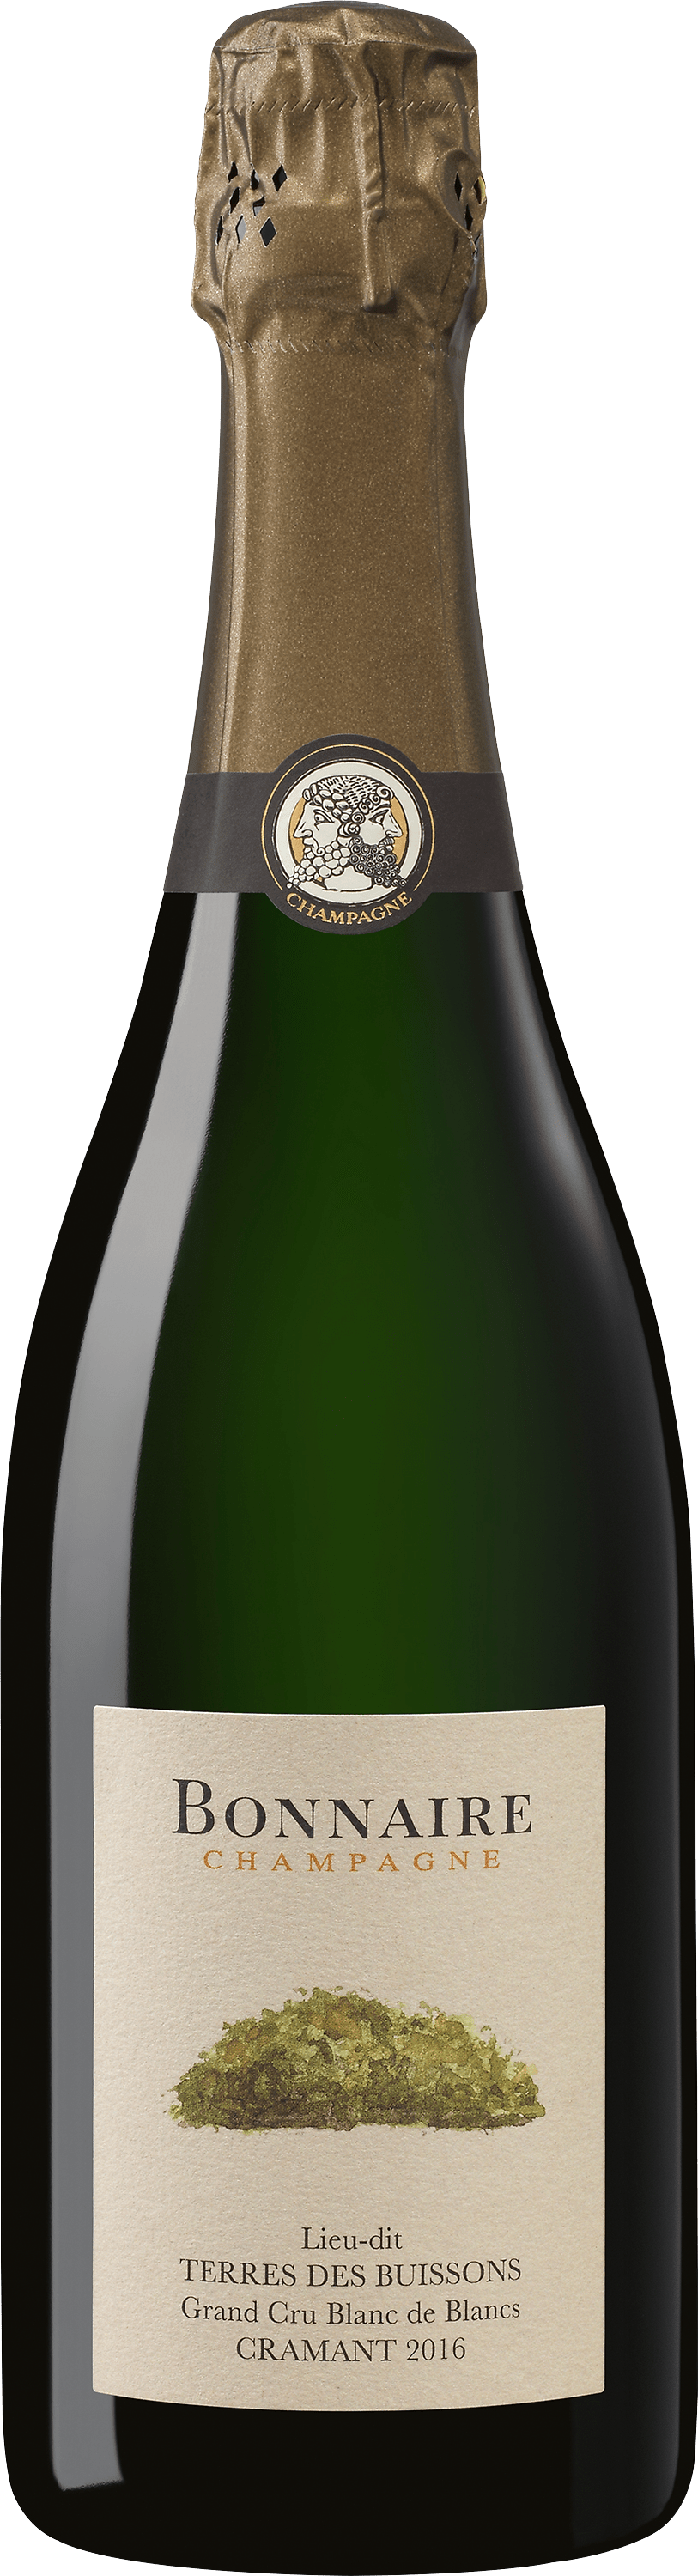 Image of 2016 Bonnaire Champagner »Terres des Buissons«